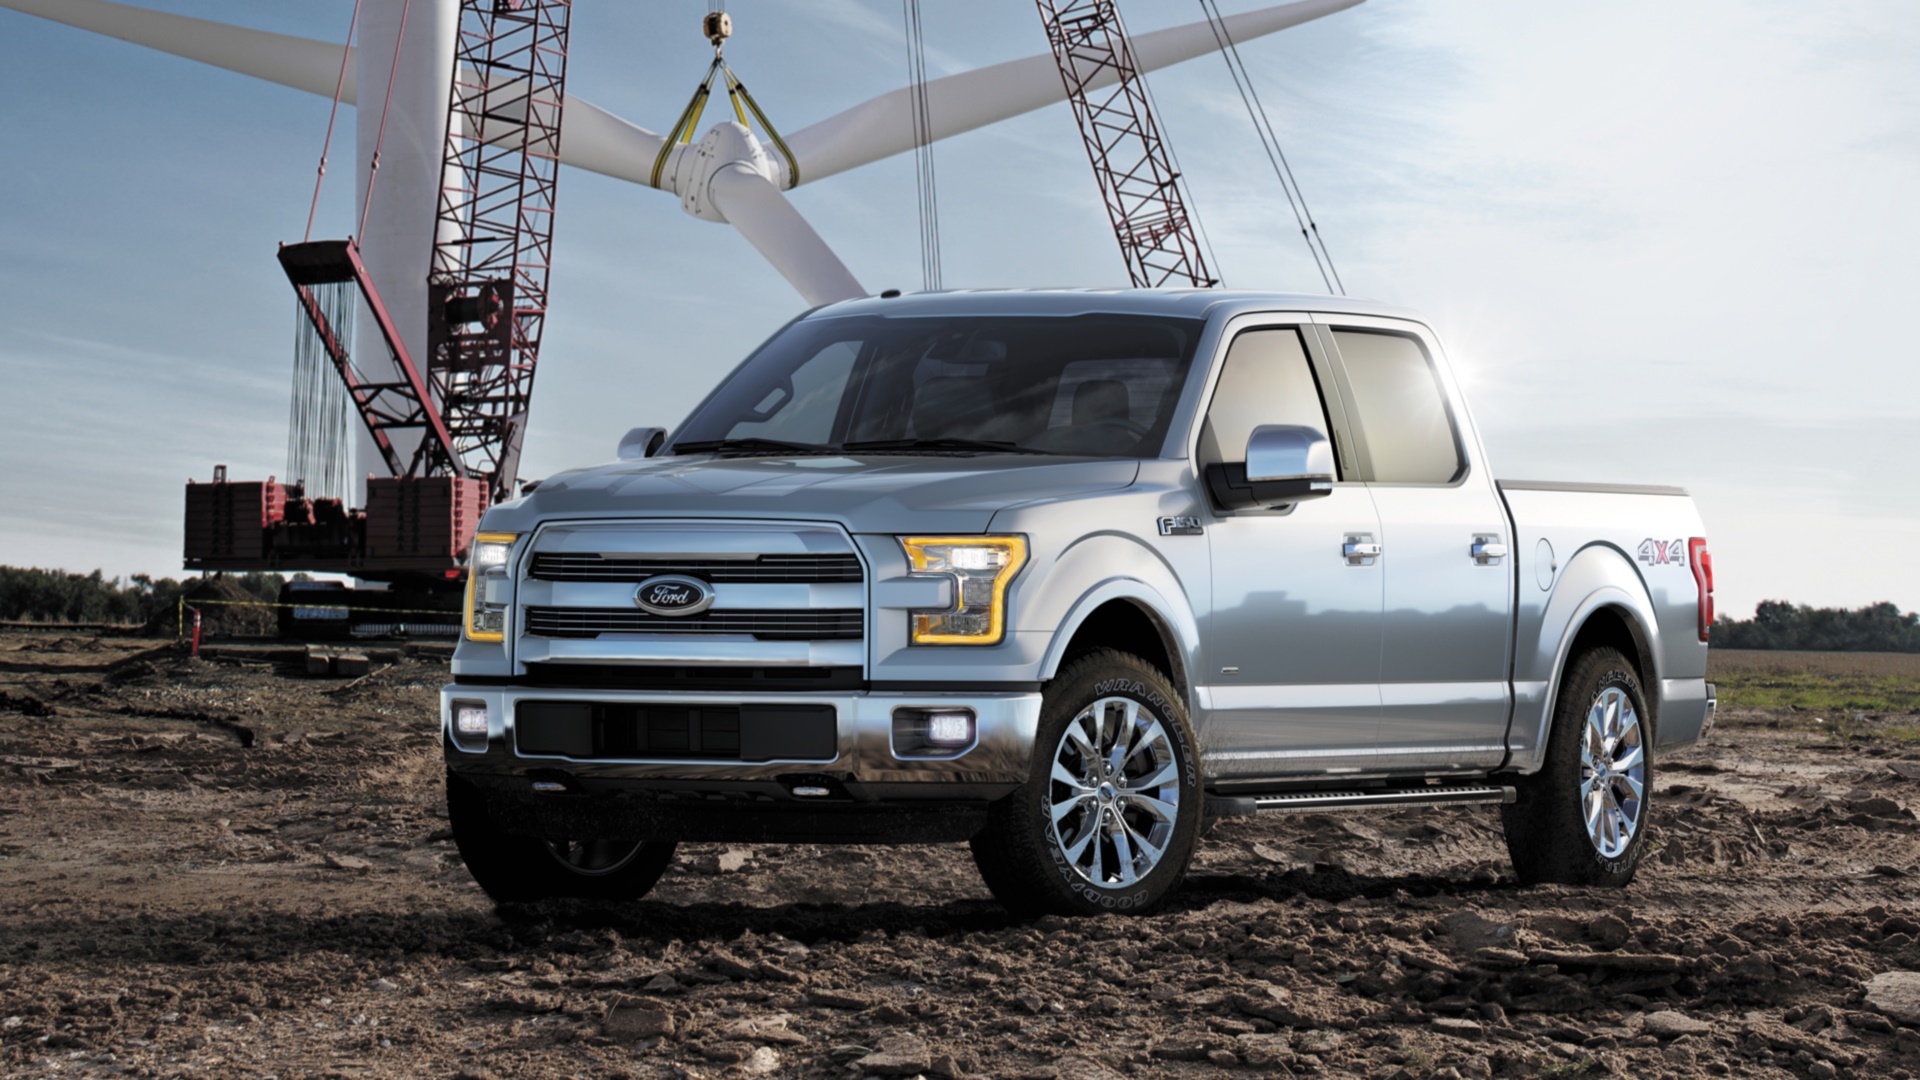 Vehicles 2015 Ford F-150 HD Wallpaper | Background Image